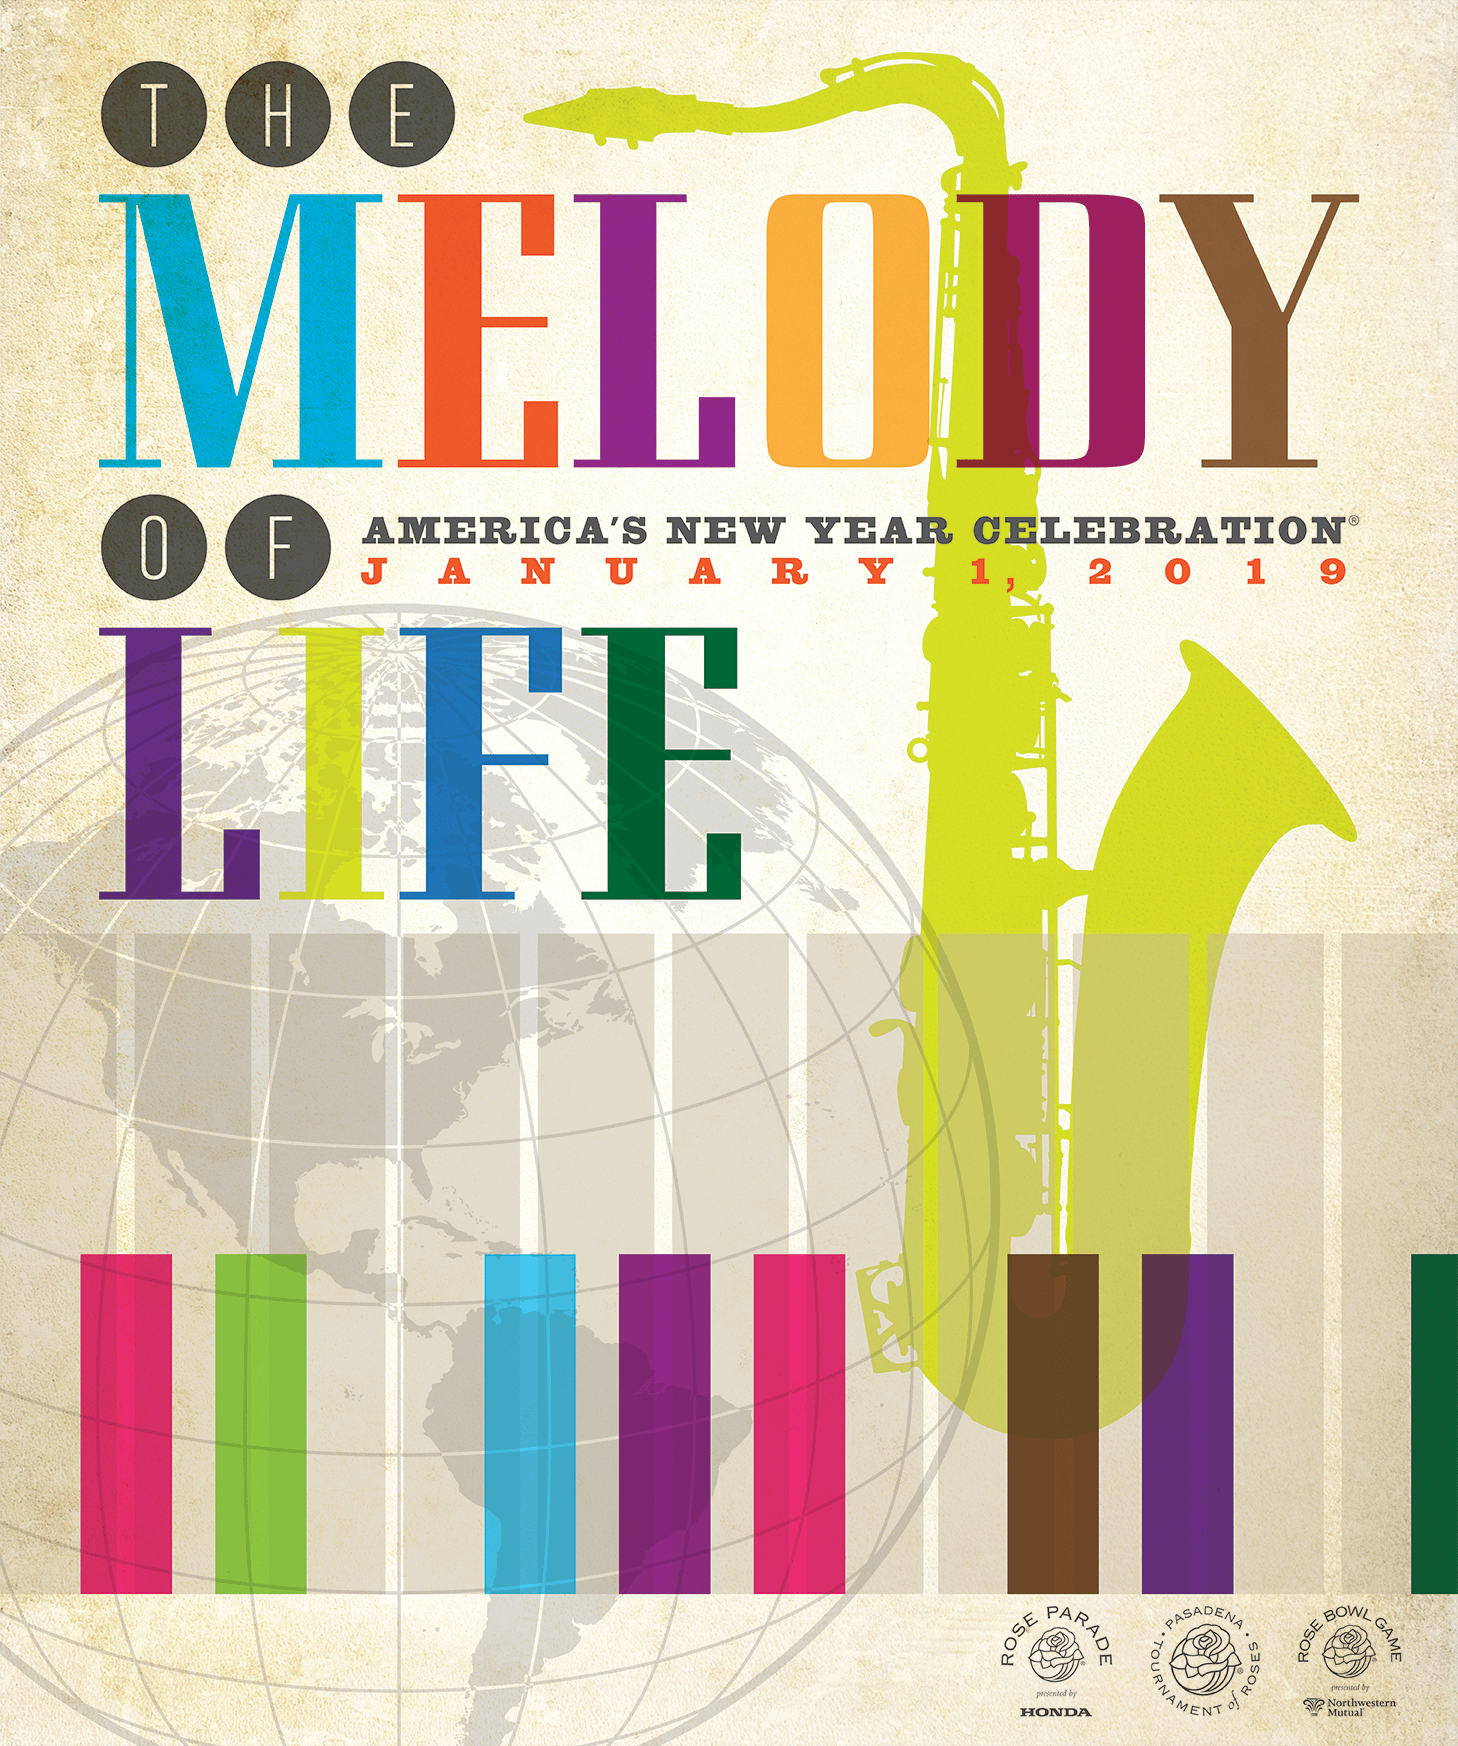 Colorful poster with text "The Melody of Life"